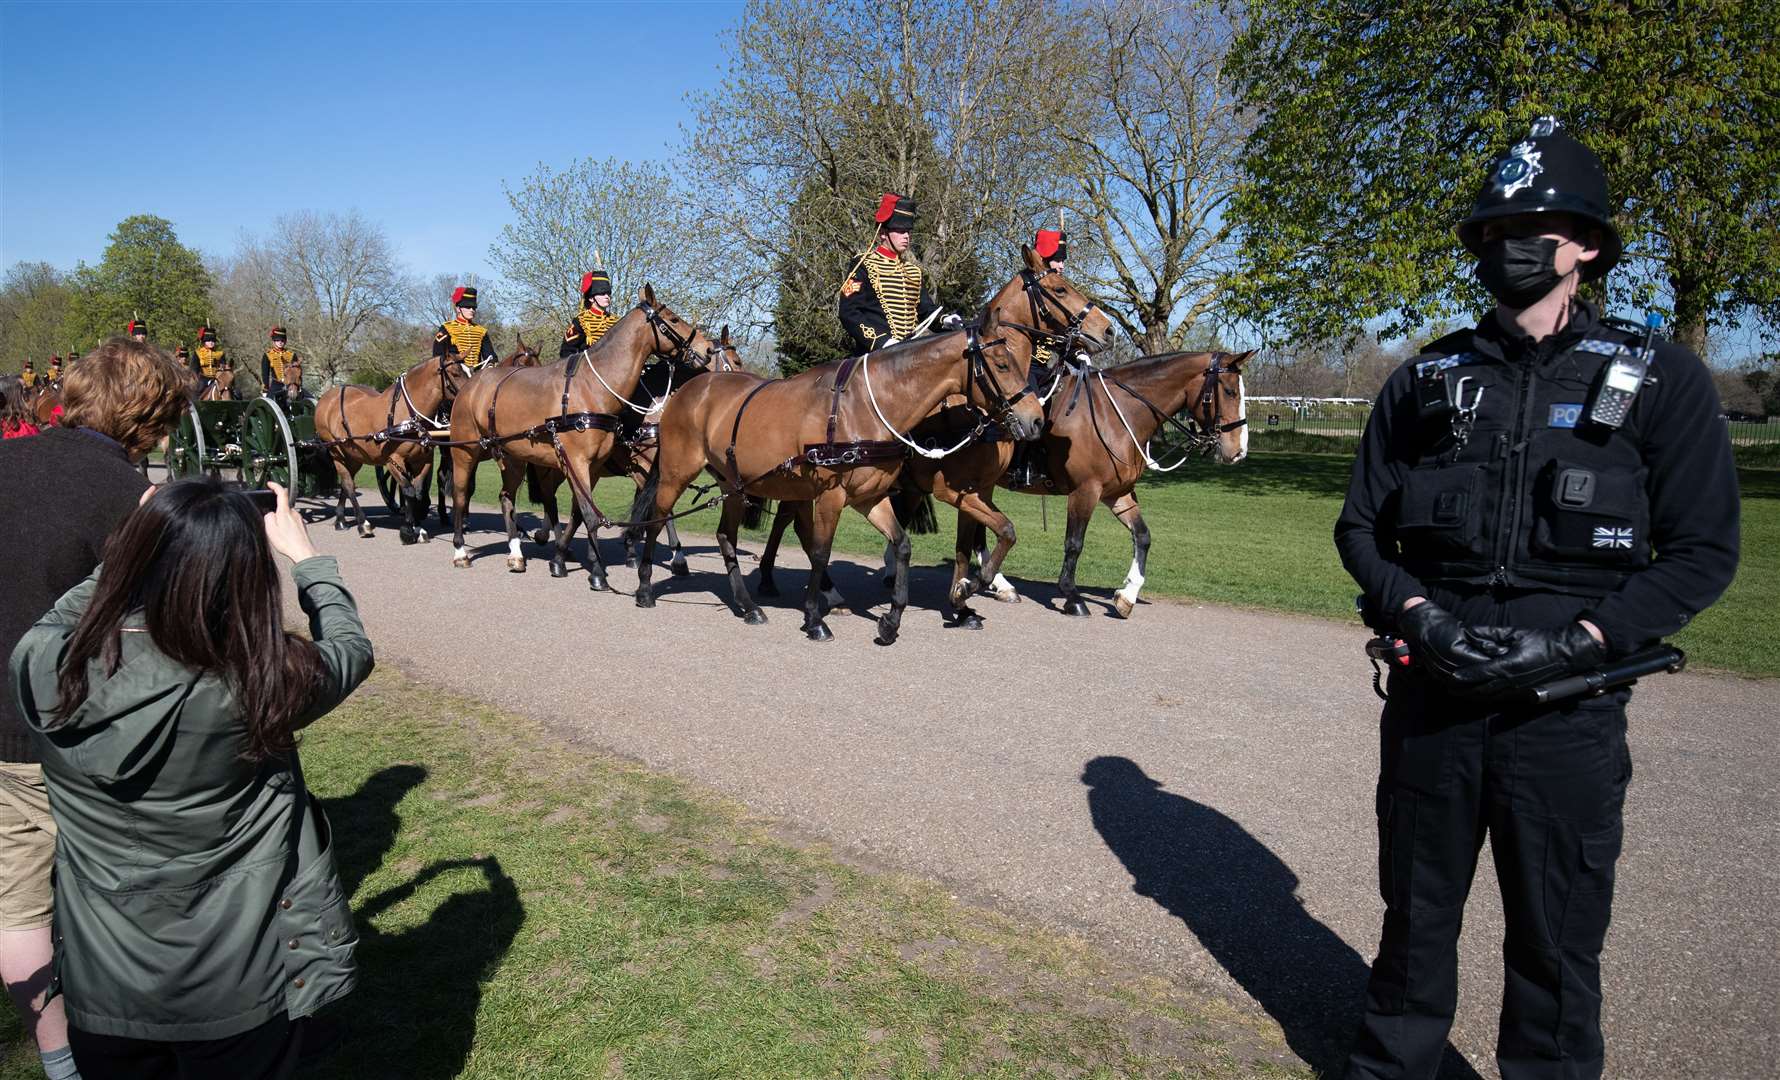 Police were patrolling the crowds in Windsor Great Park (Andrew Matthews/PA)